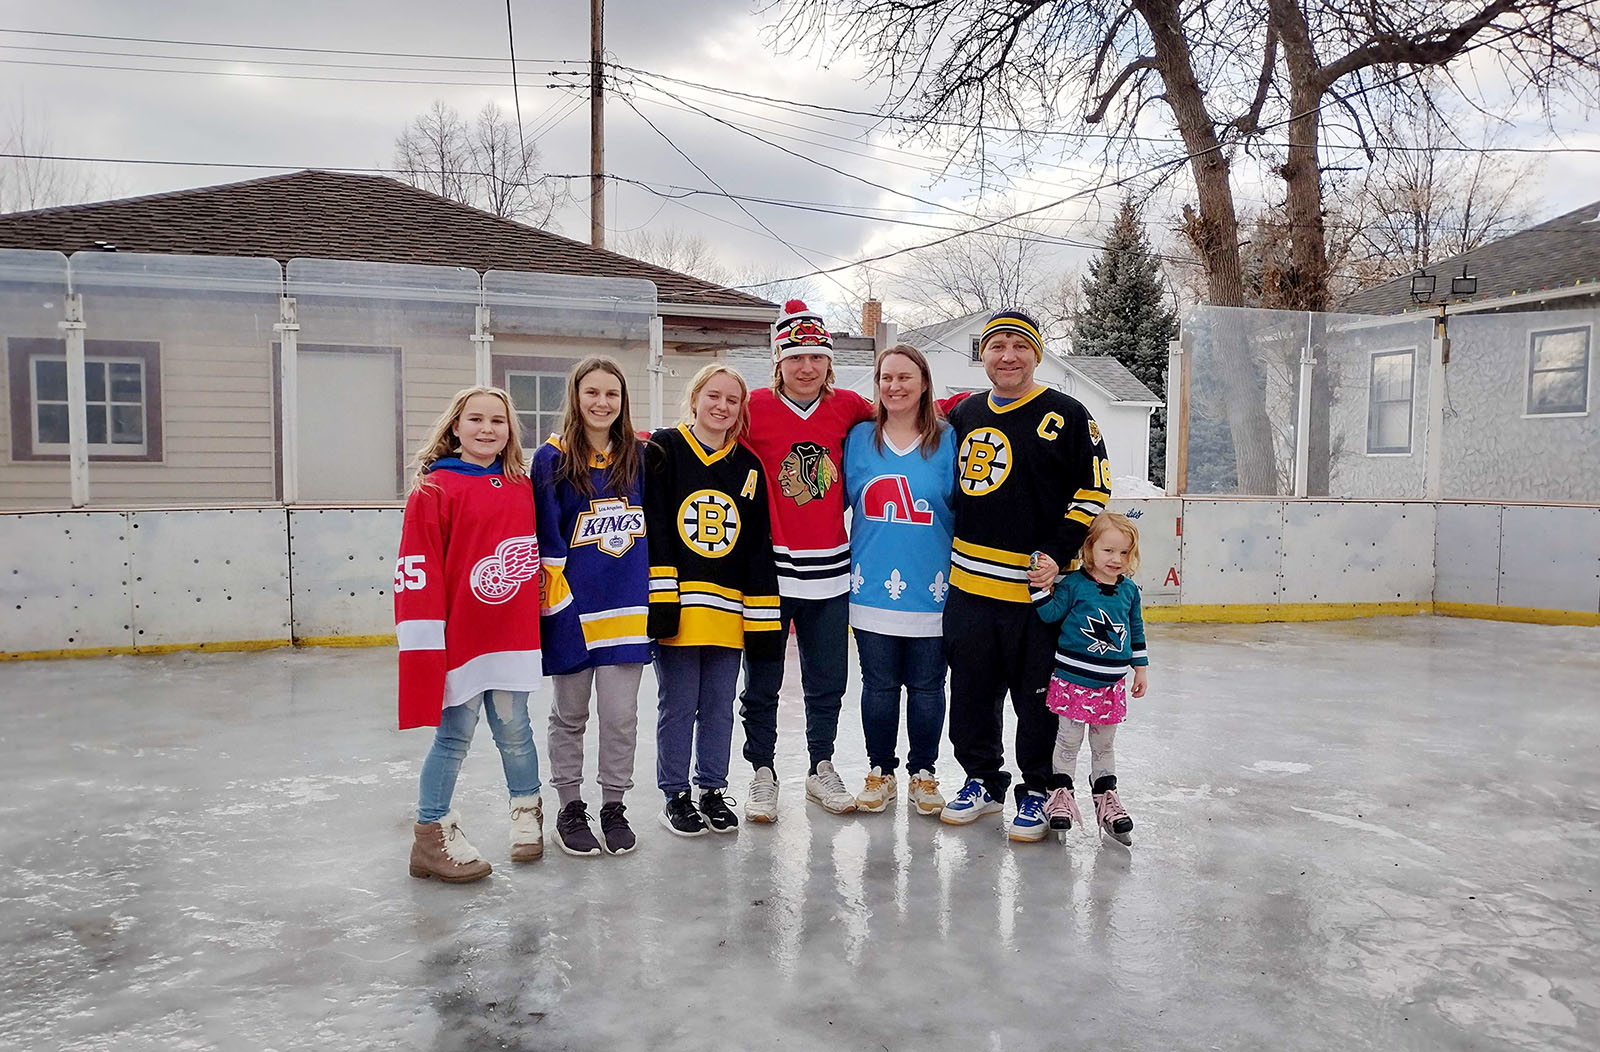 Thomas Orr and his family pose for a photo on the hockey rink he built at their home in Aberdeen, South Dakota. (Courtesy photo)